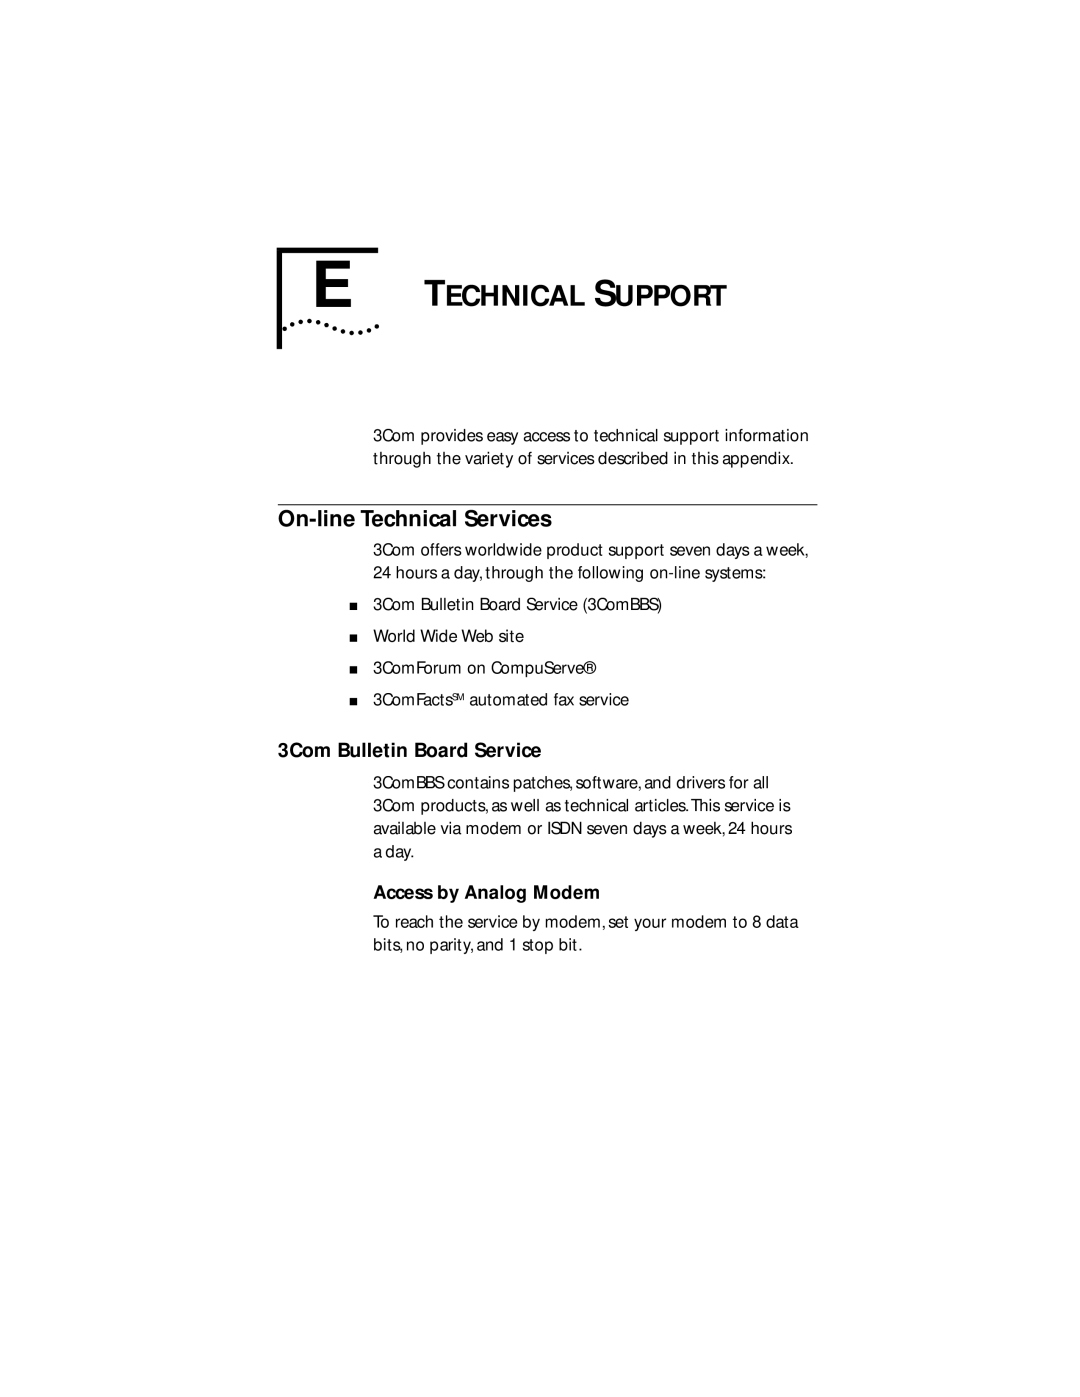 3Com 3C882 manual Technical Support, On-line Technical Services, 3Com Bulletin Board Service 